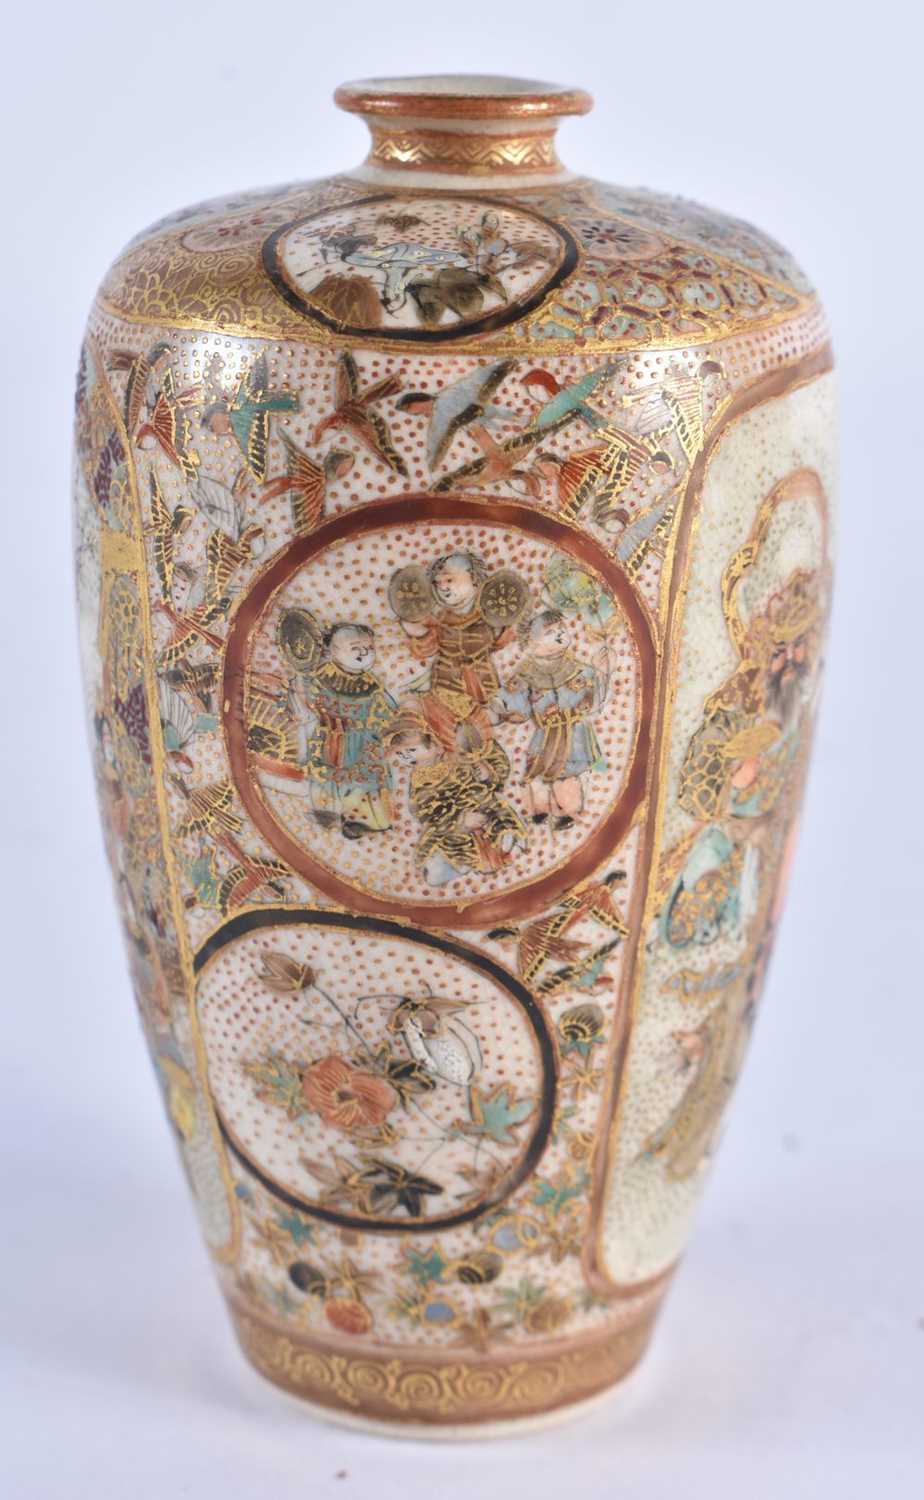 A SMALL 19TH CENTURY JAPANESE MEIJI PERIOD SATSUMA POTTERY VASE painted with figures and birds - Image 4 of 14